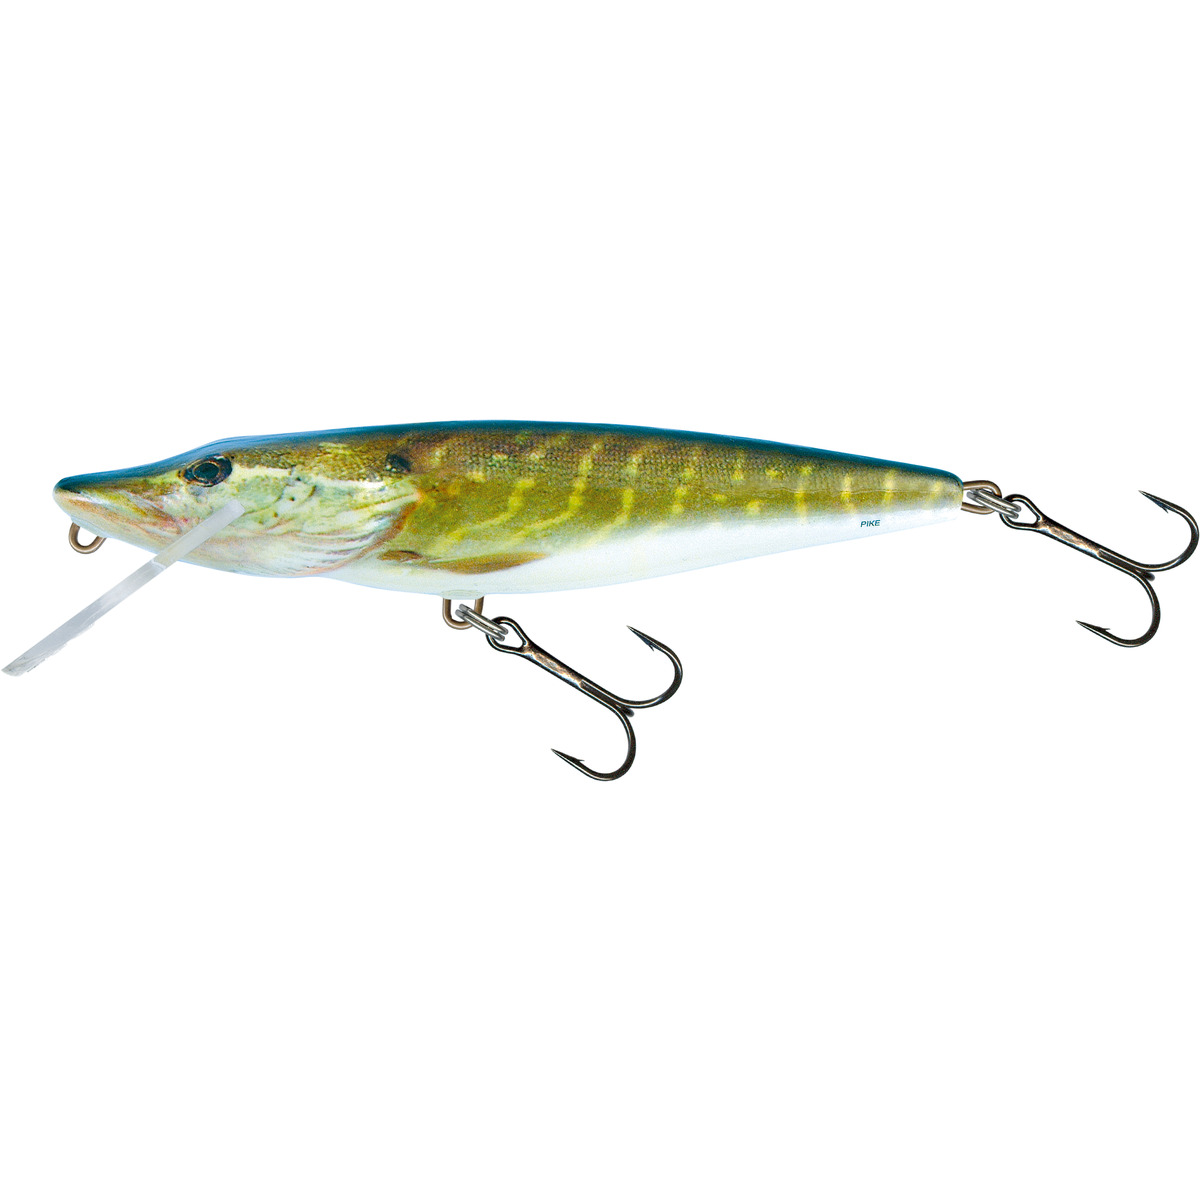 Salmo Pike Jointed Deep Runner - 11 Cm - Real Pike